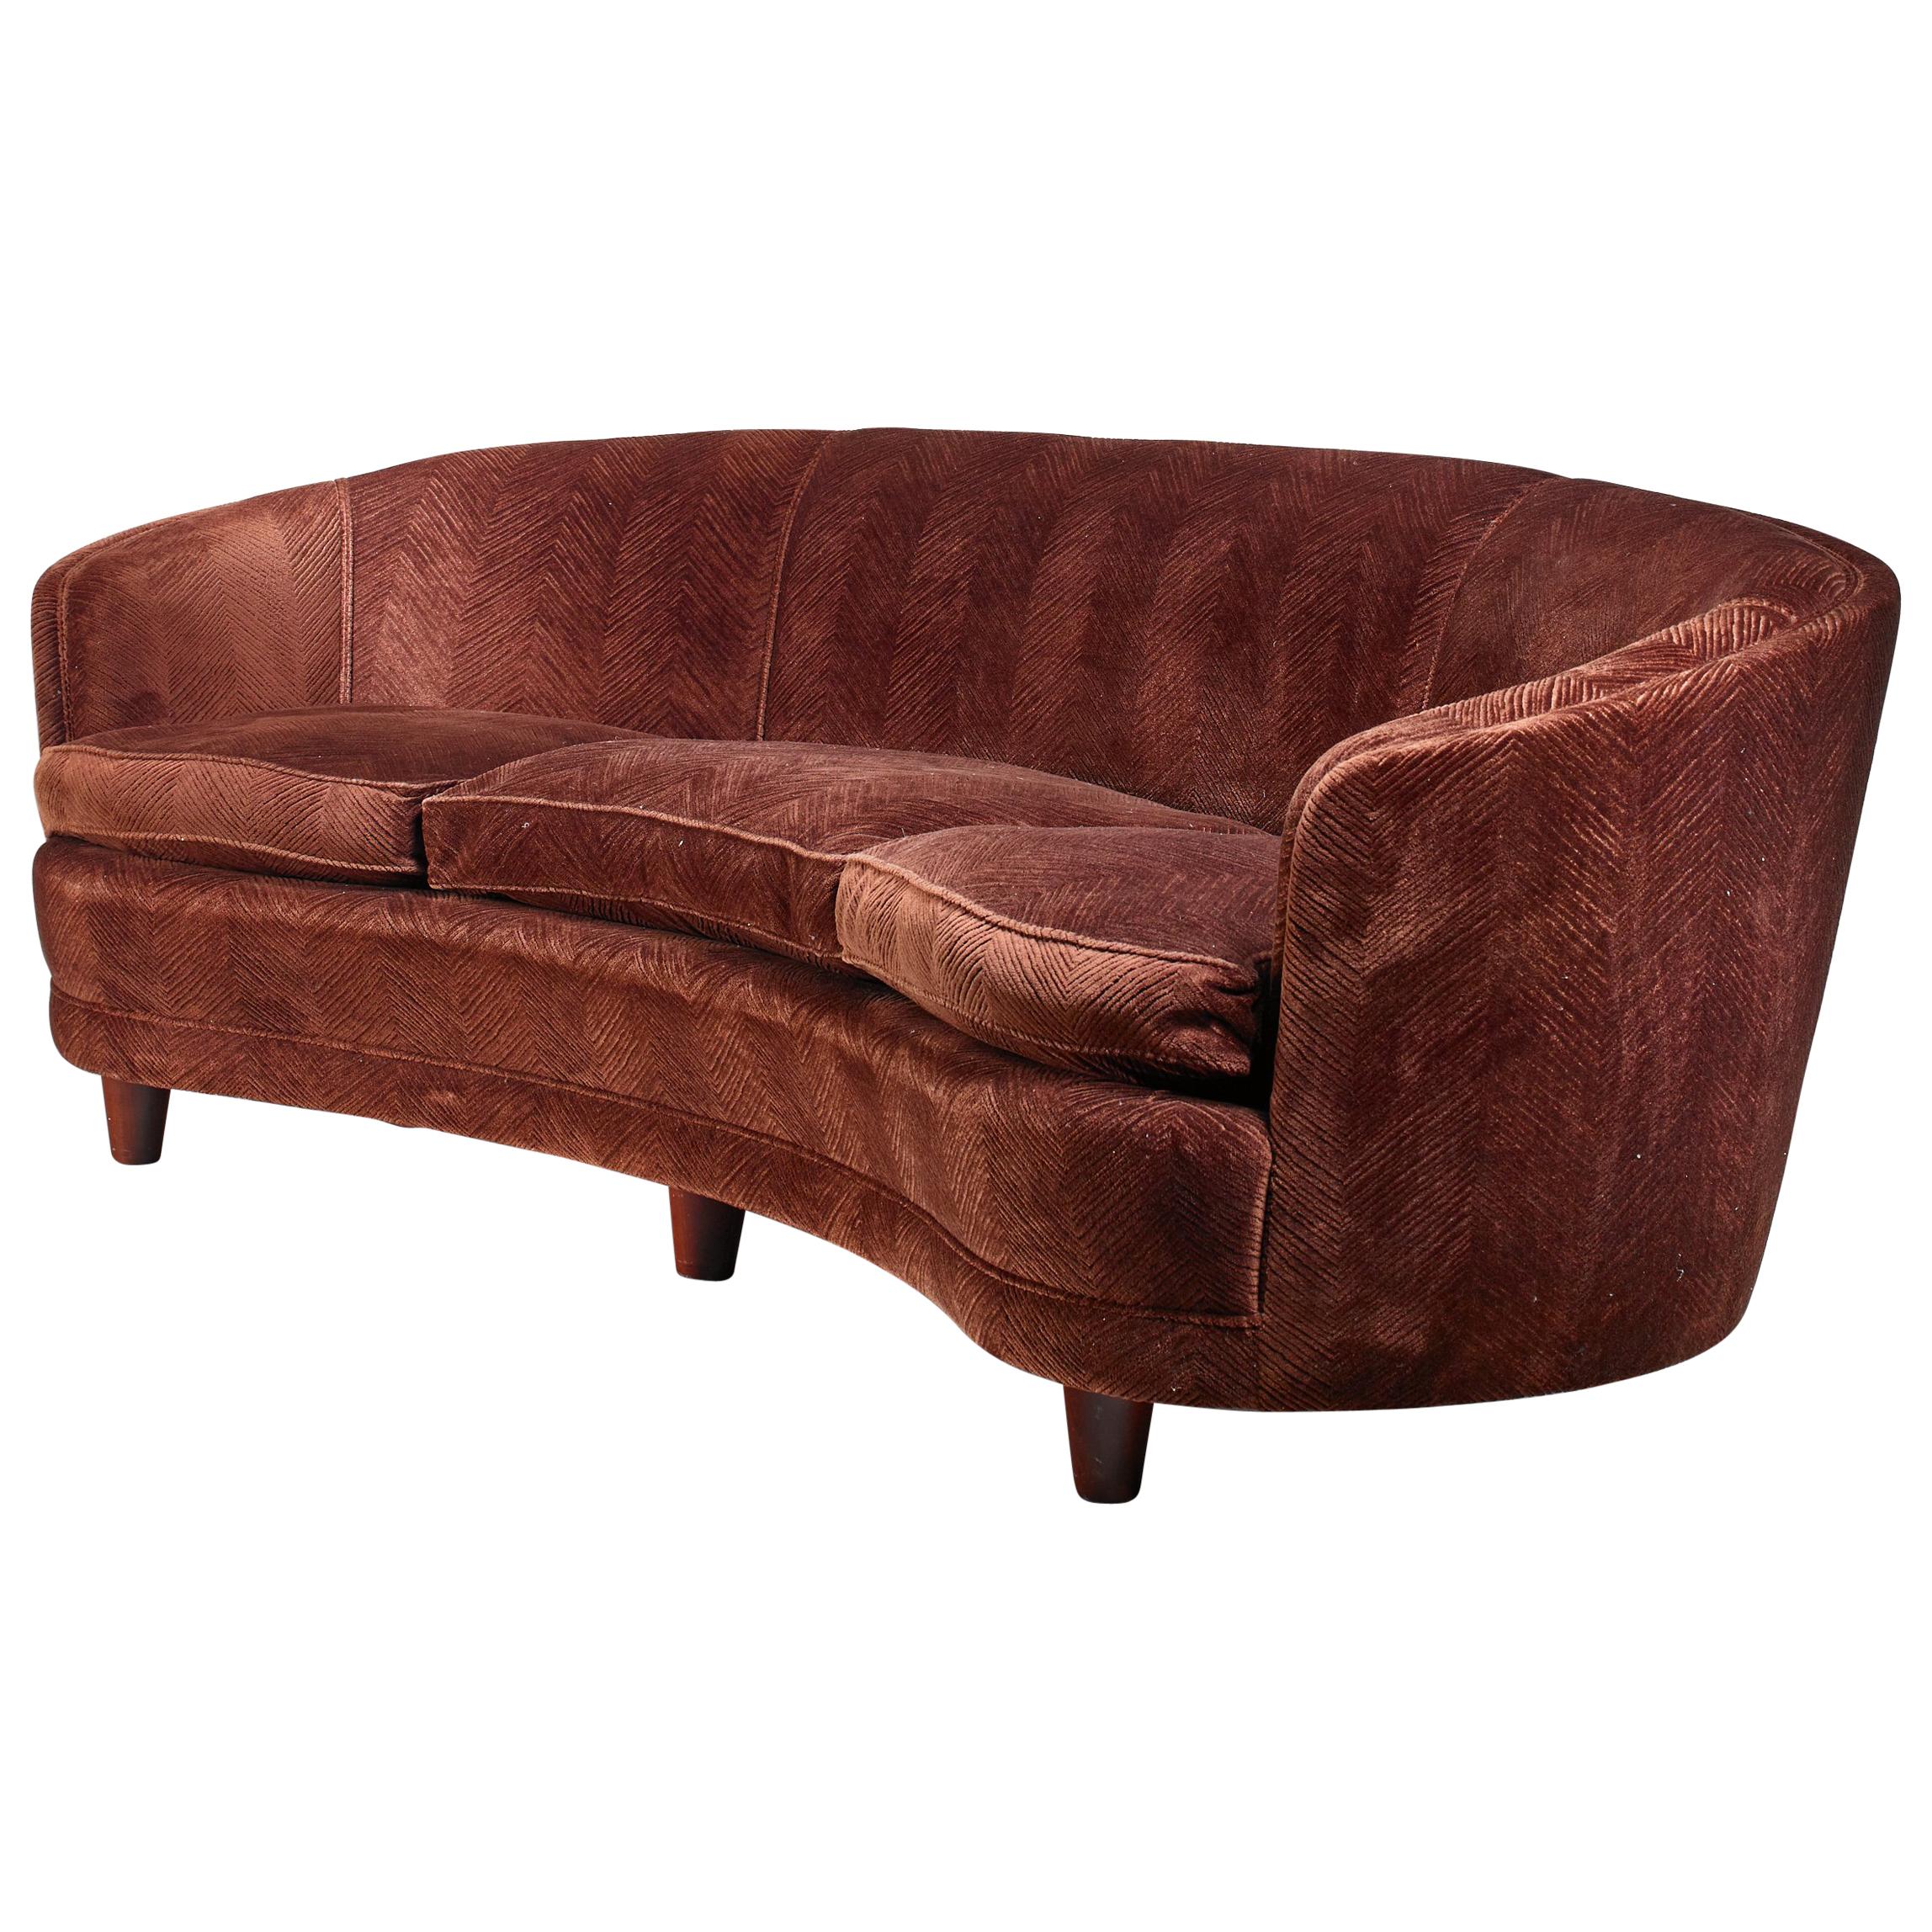 Large Curved, Brown Scandinavian Sofa, 1940s For Sale